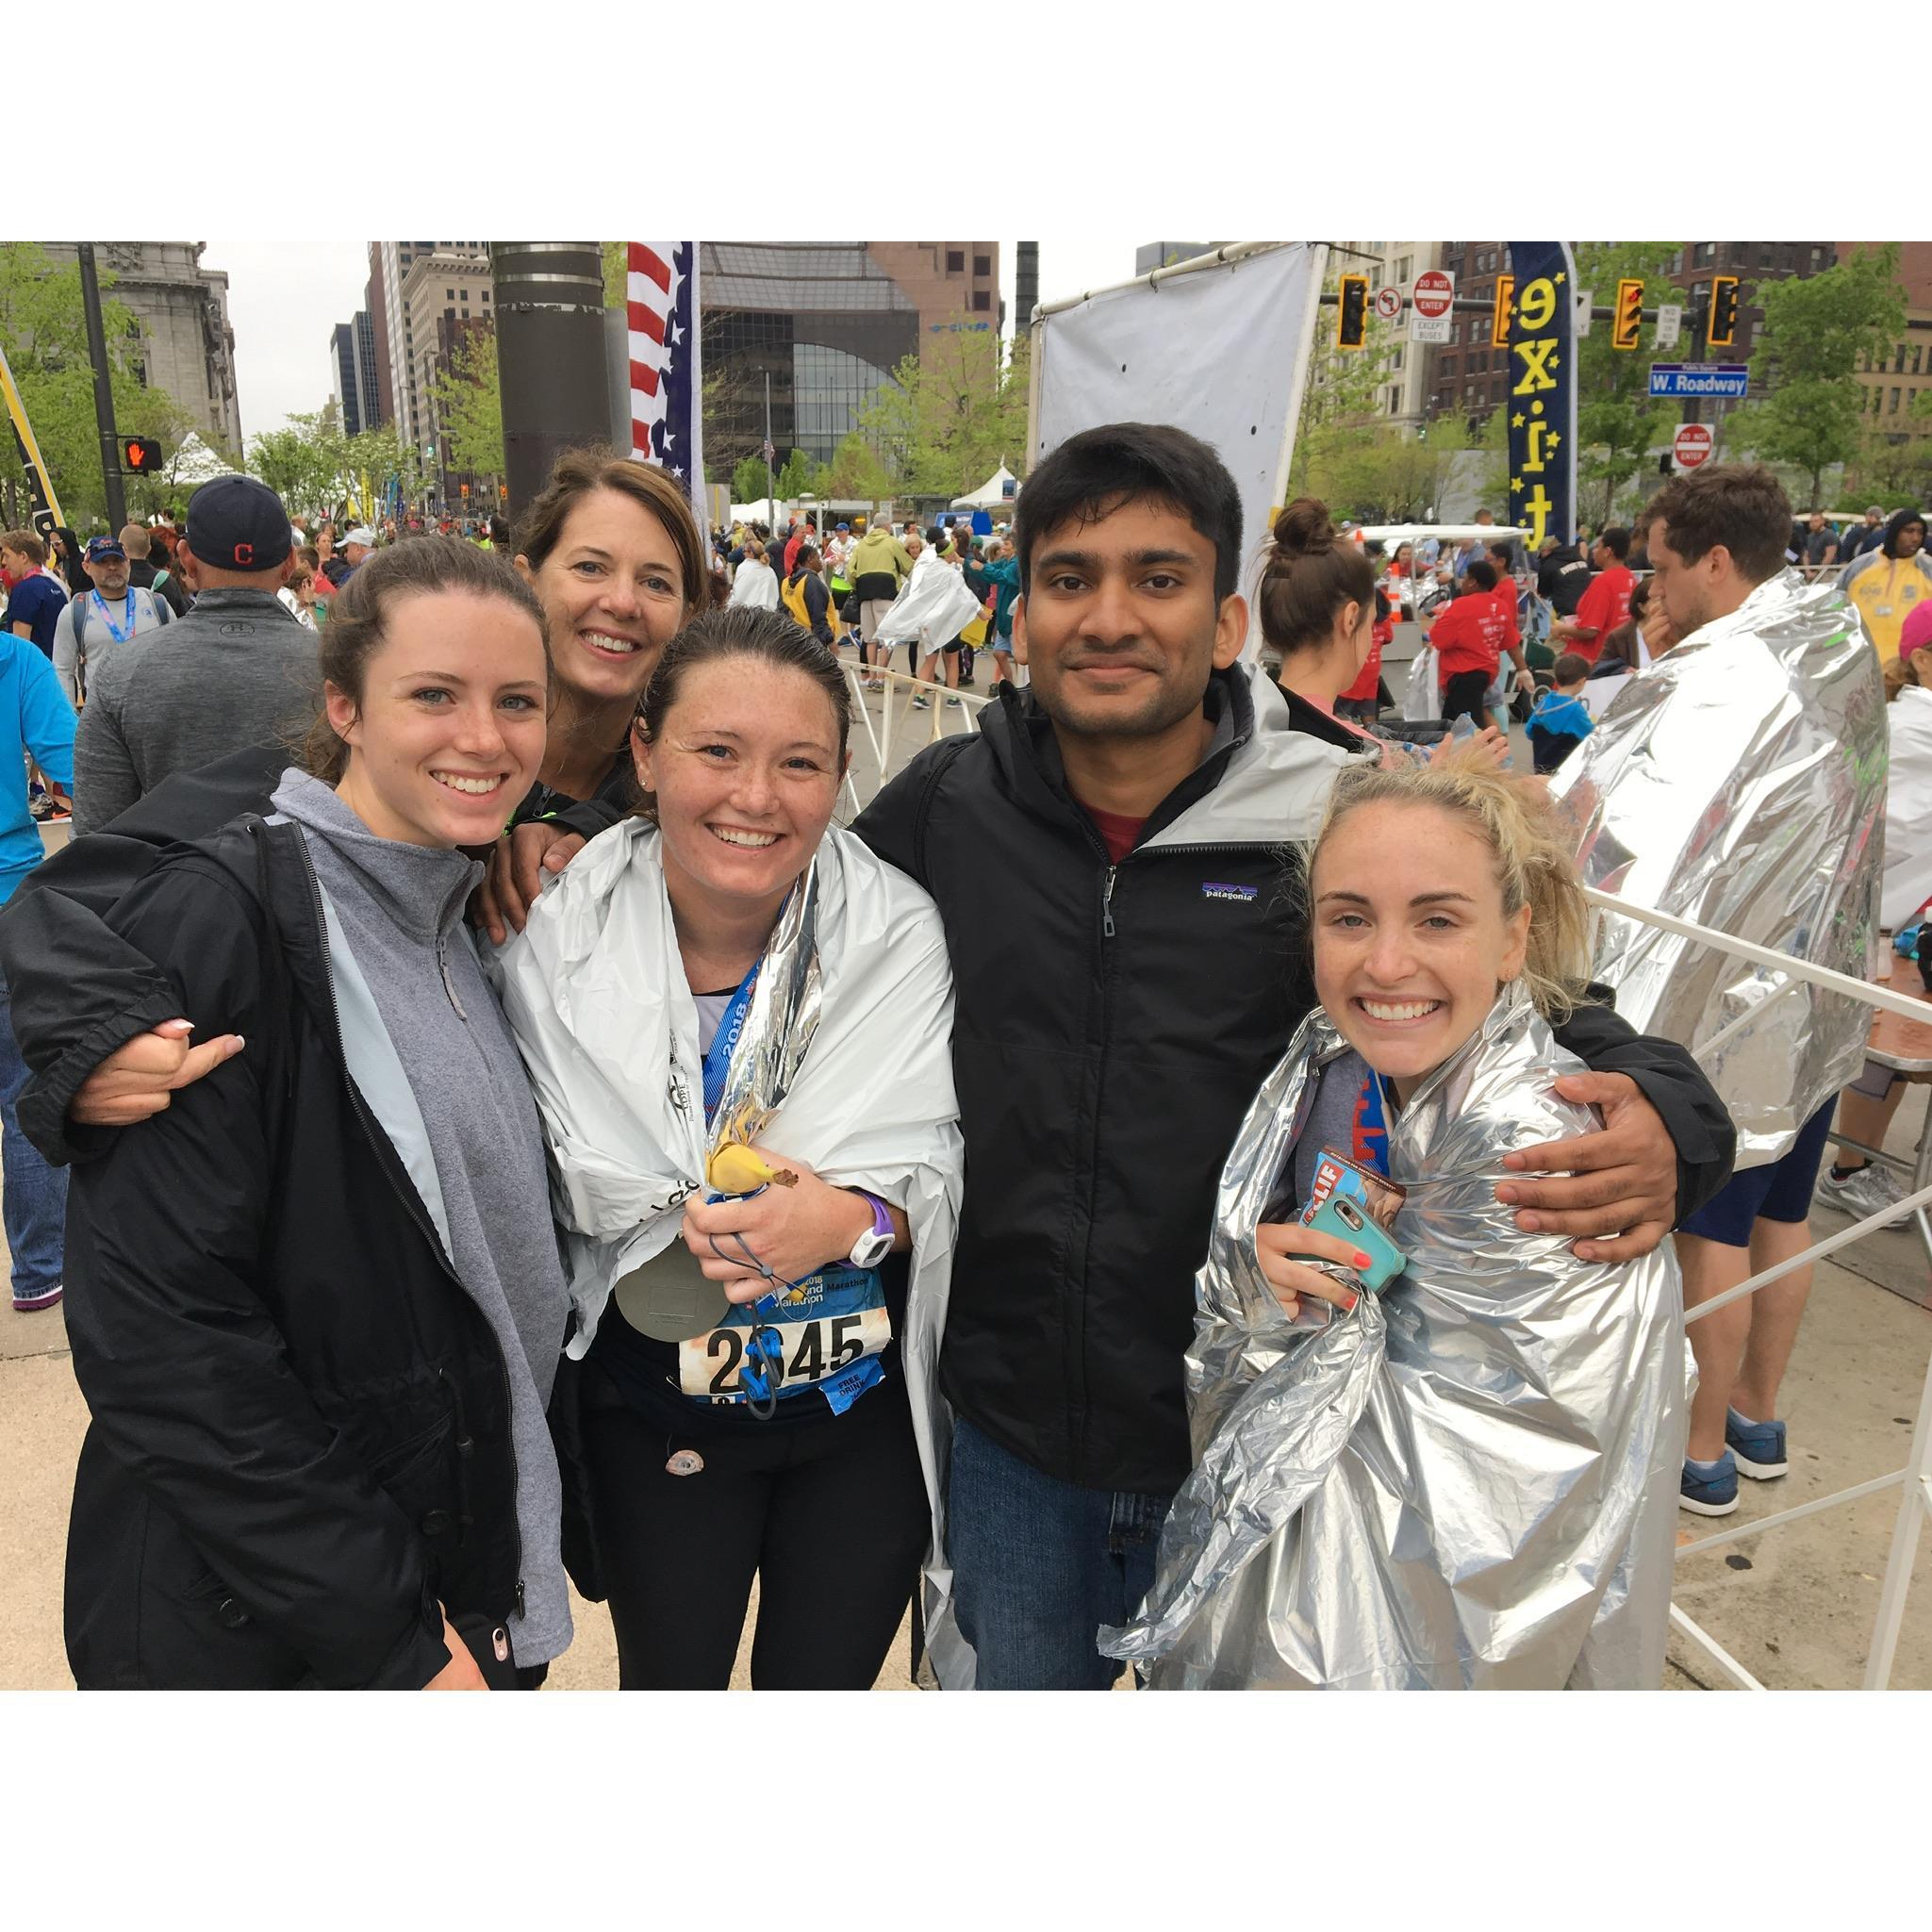 When Nancy was running a marathon in May 2018 with cousins Meghan & Cristin, Chowkas bravely took this as his opportunity to visit Akron for the first time and meet the family....a successful trip!